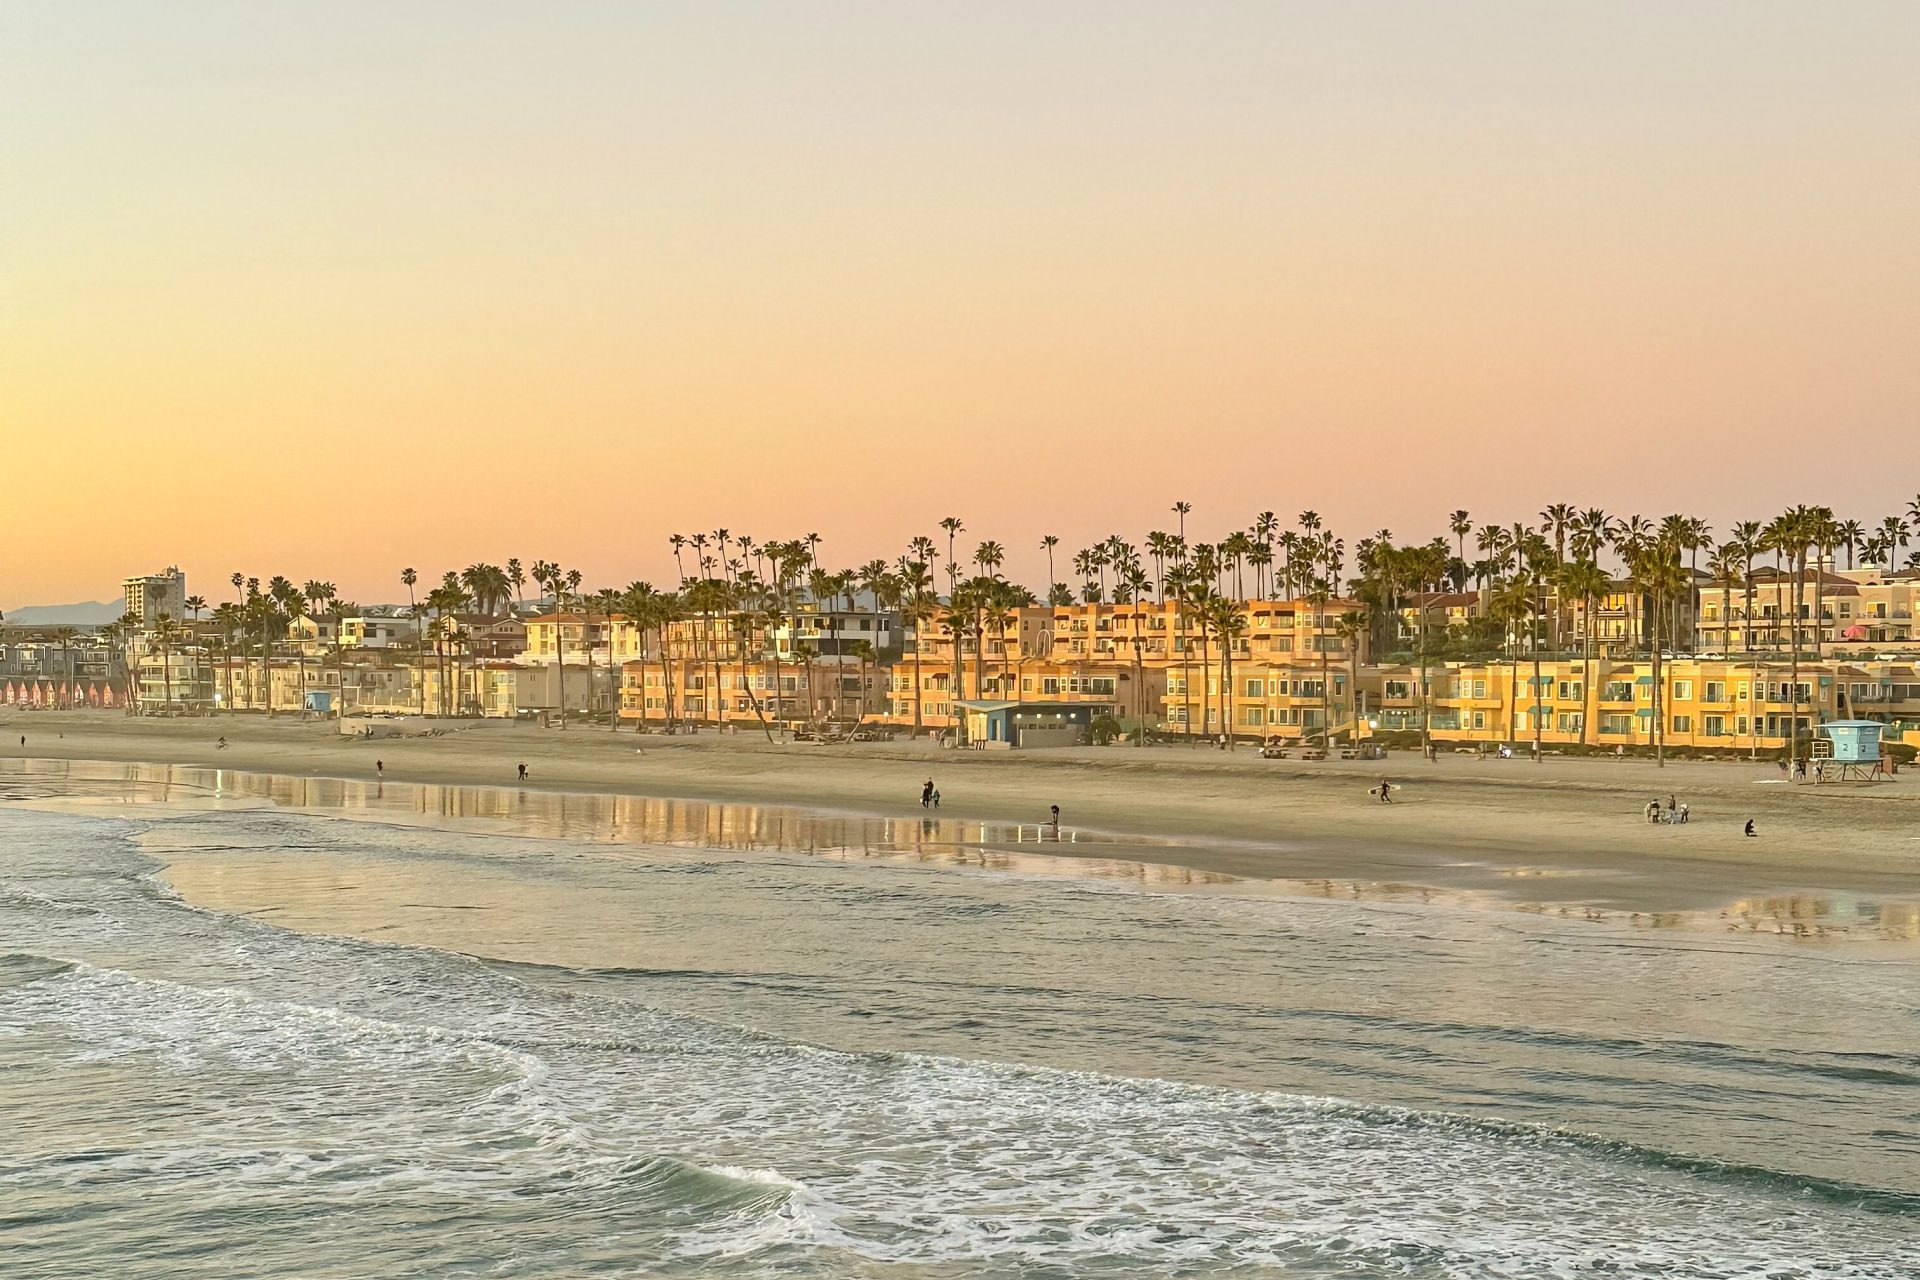 7 Reasons to Pick Oceanside for a Southern California Girls’ Trip